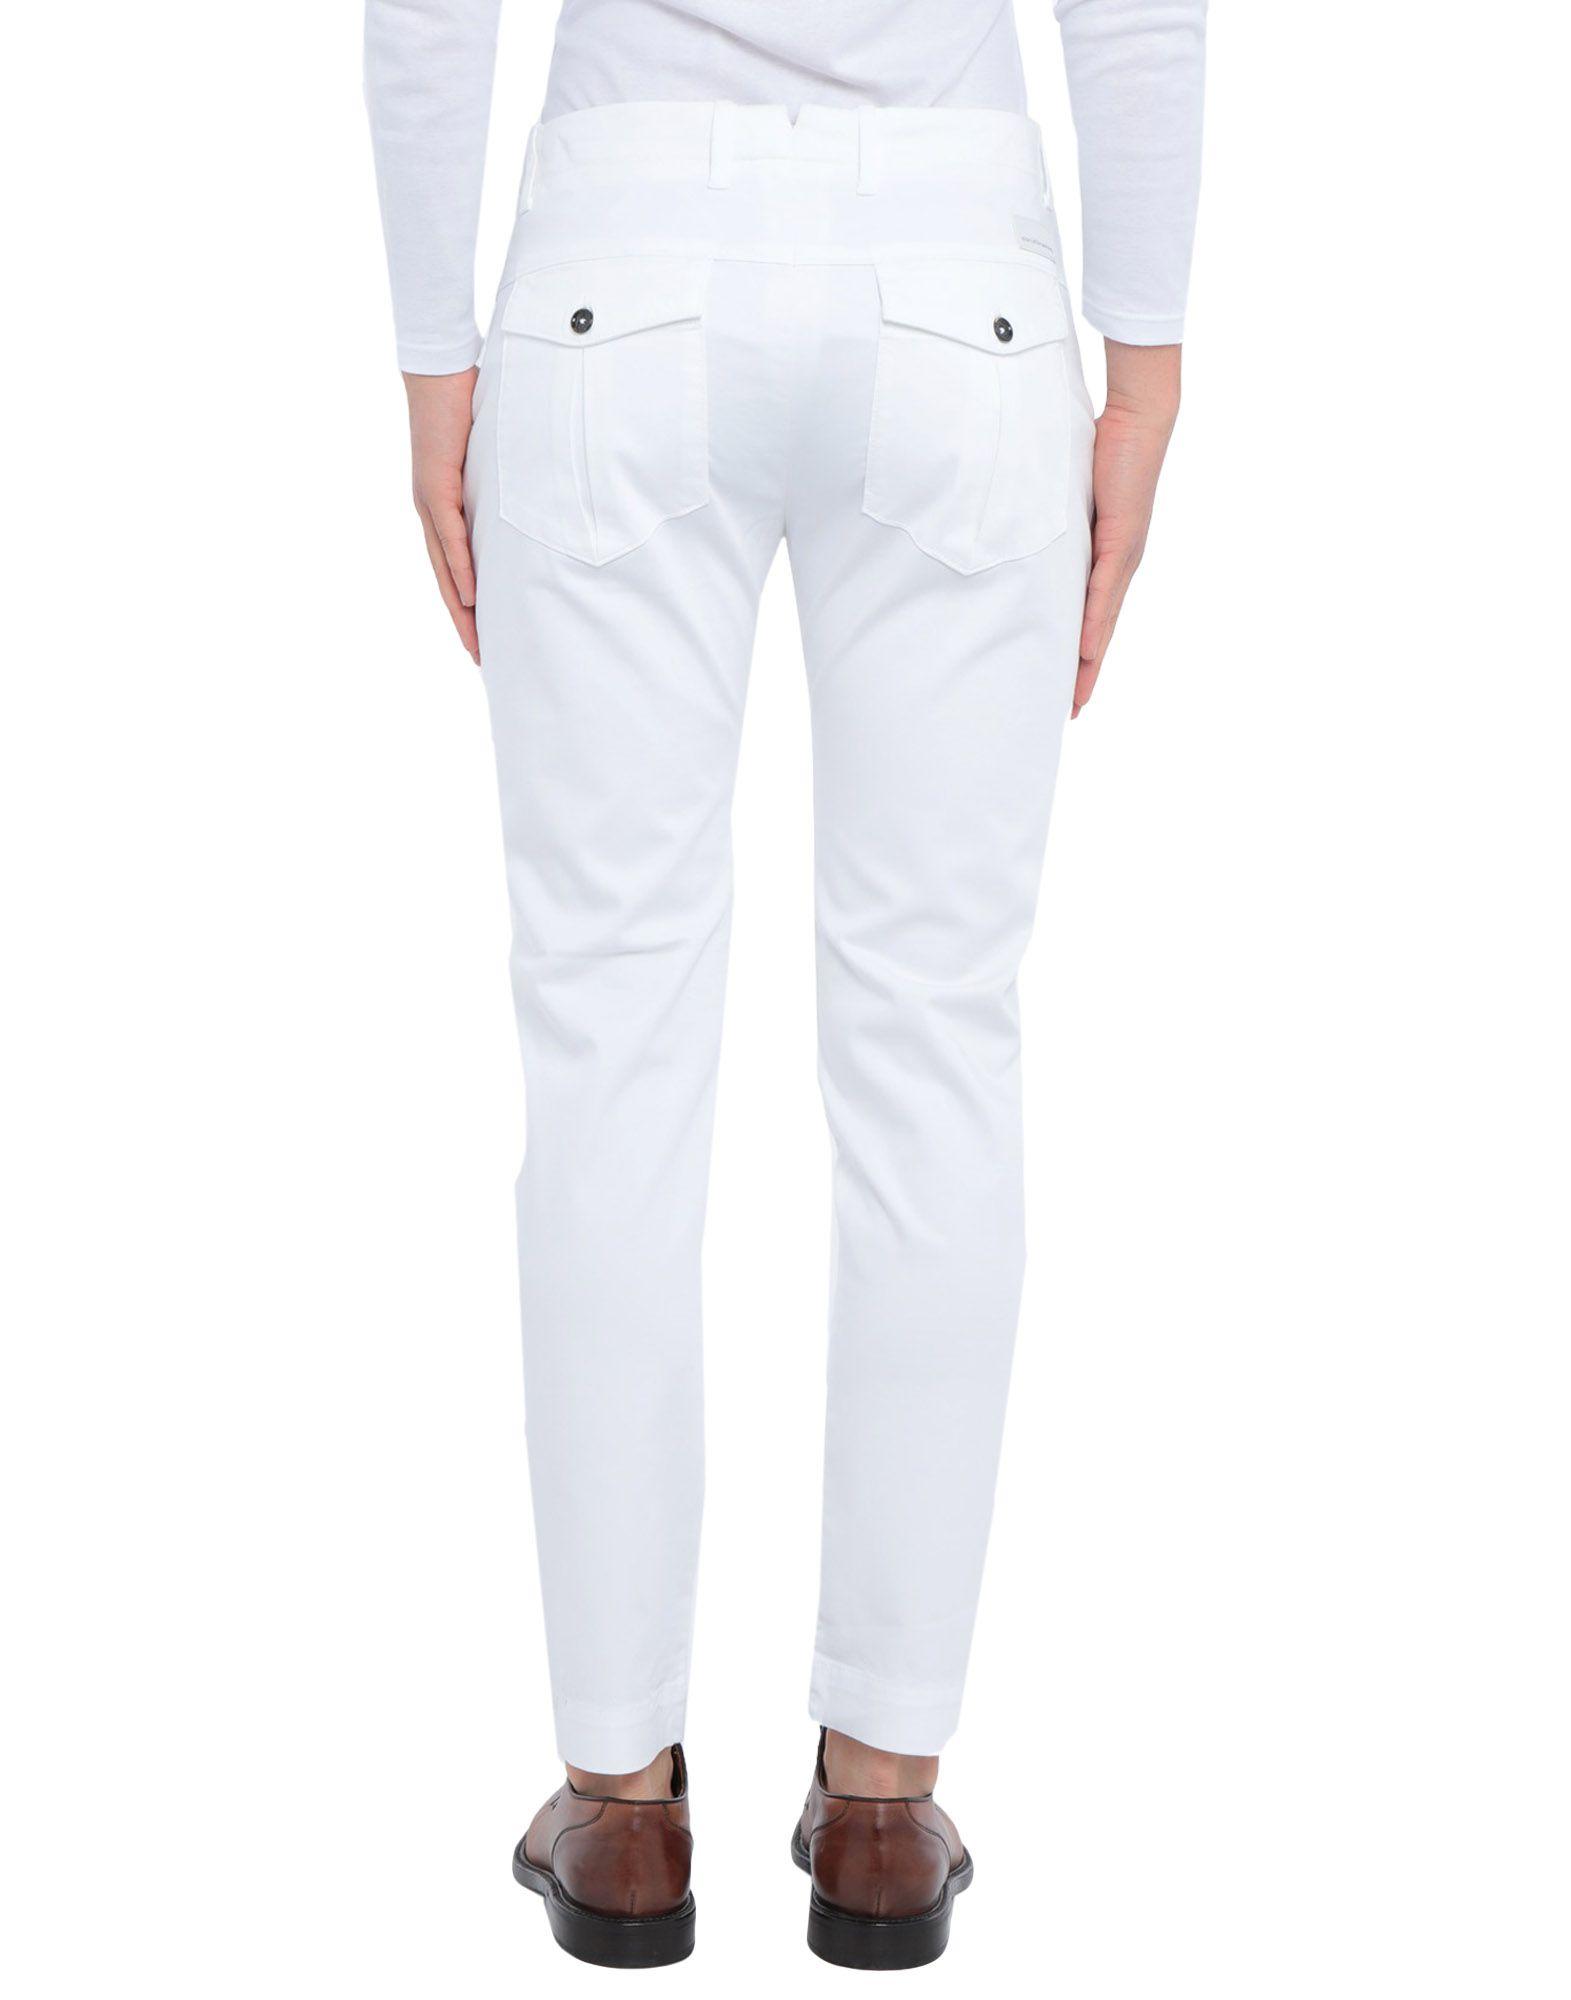 Nine:inthe:morning Cotton Casual Pants in White for Men - Lyst